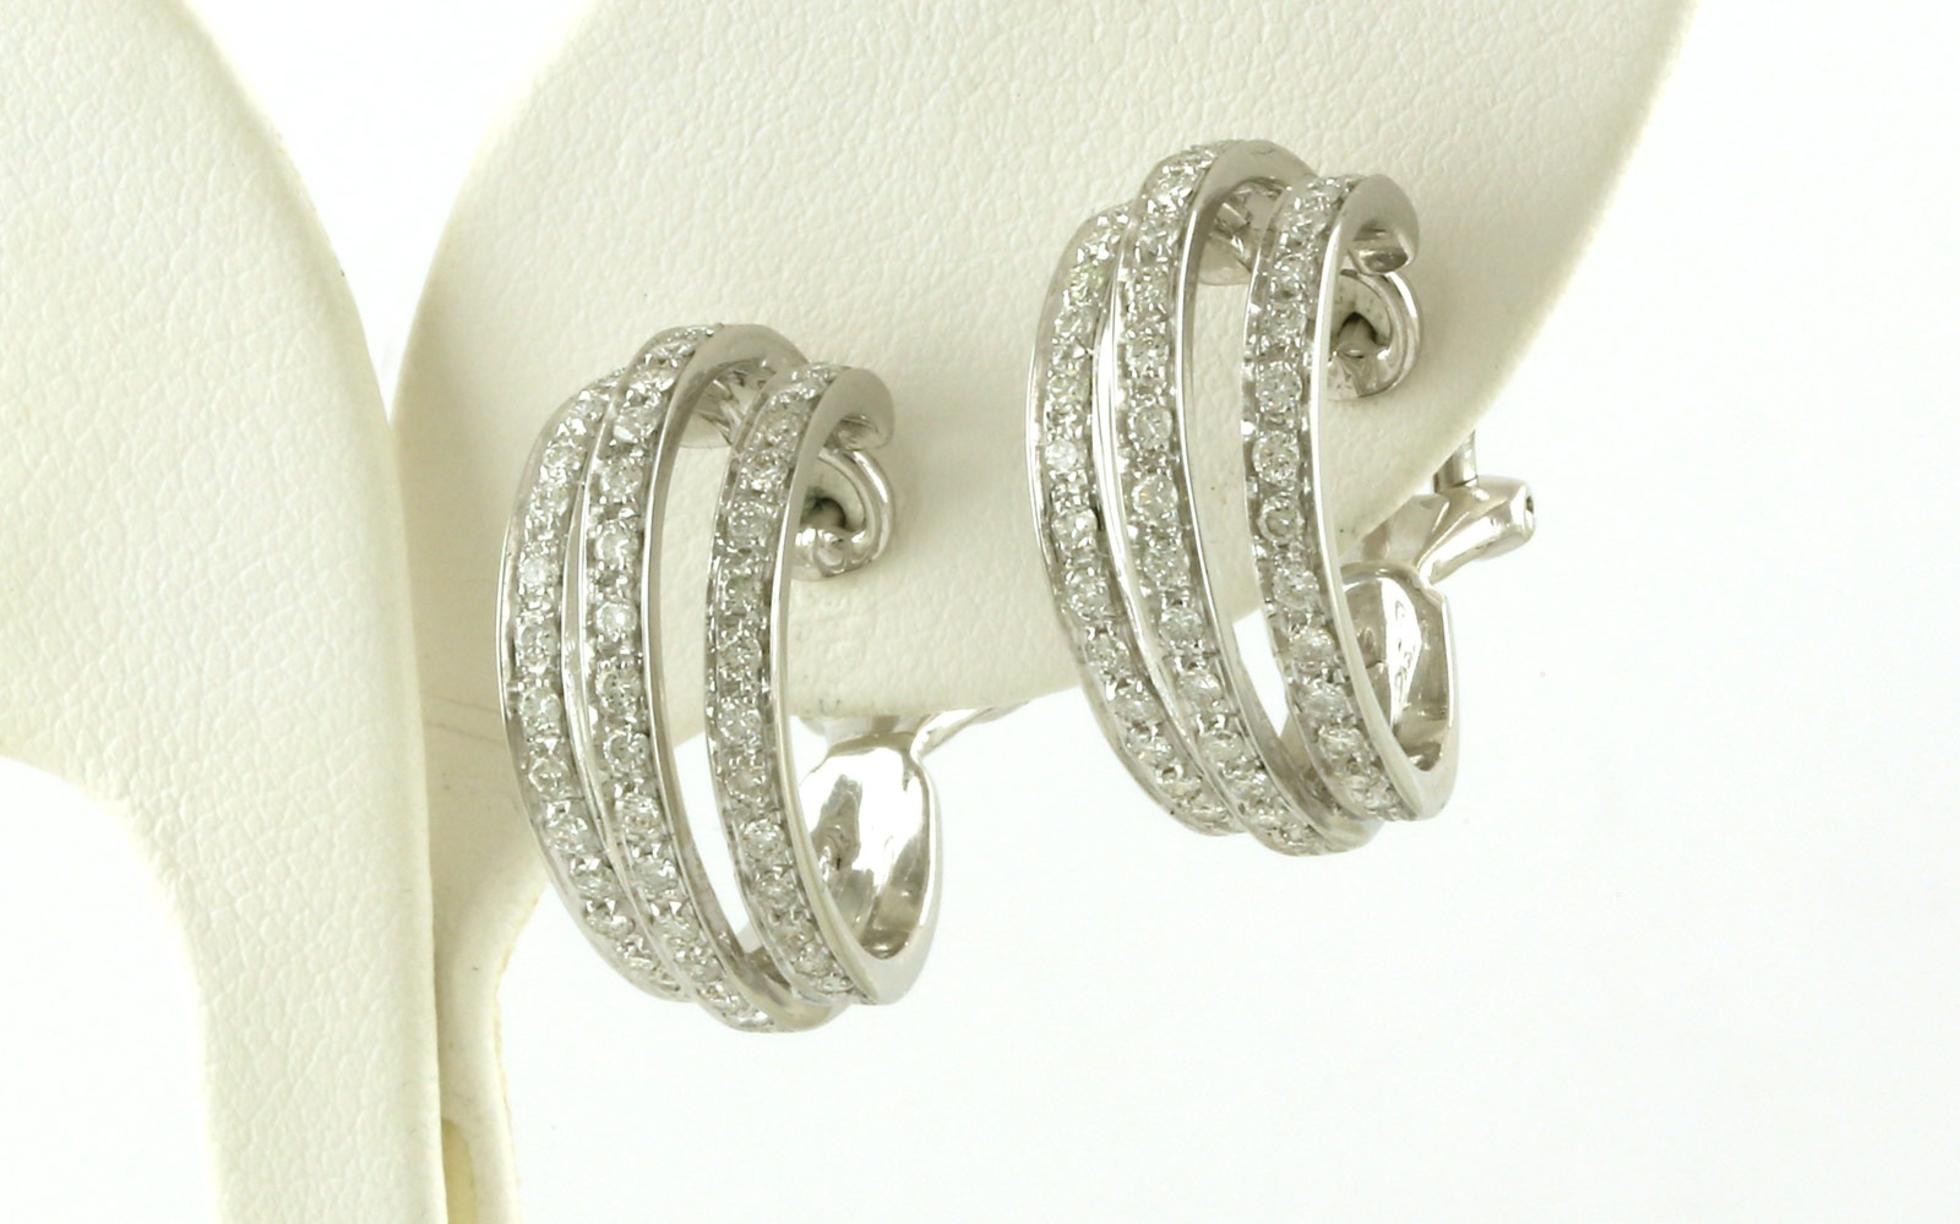 Estate Piece: 3-Row Diamond Hoop Earrings with Omega Clips in White Gold (1.32cts TWT)